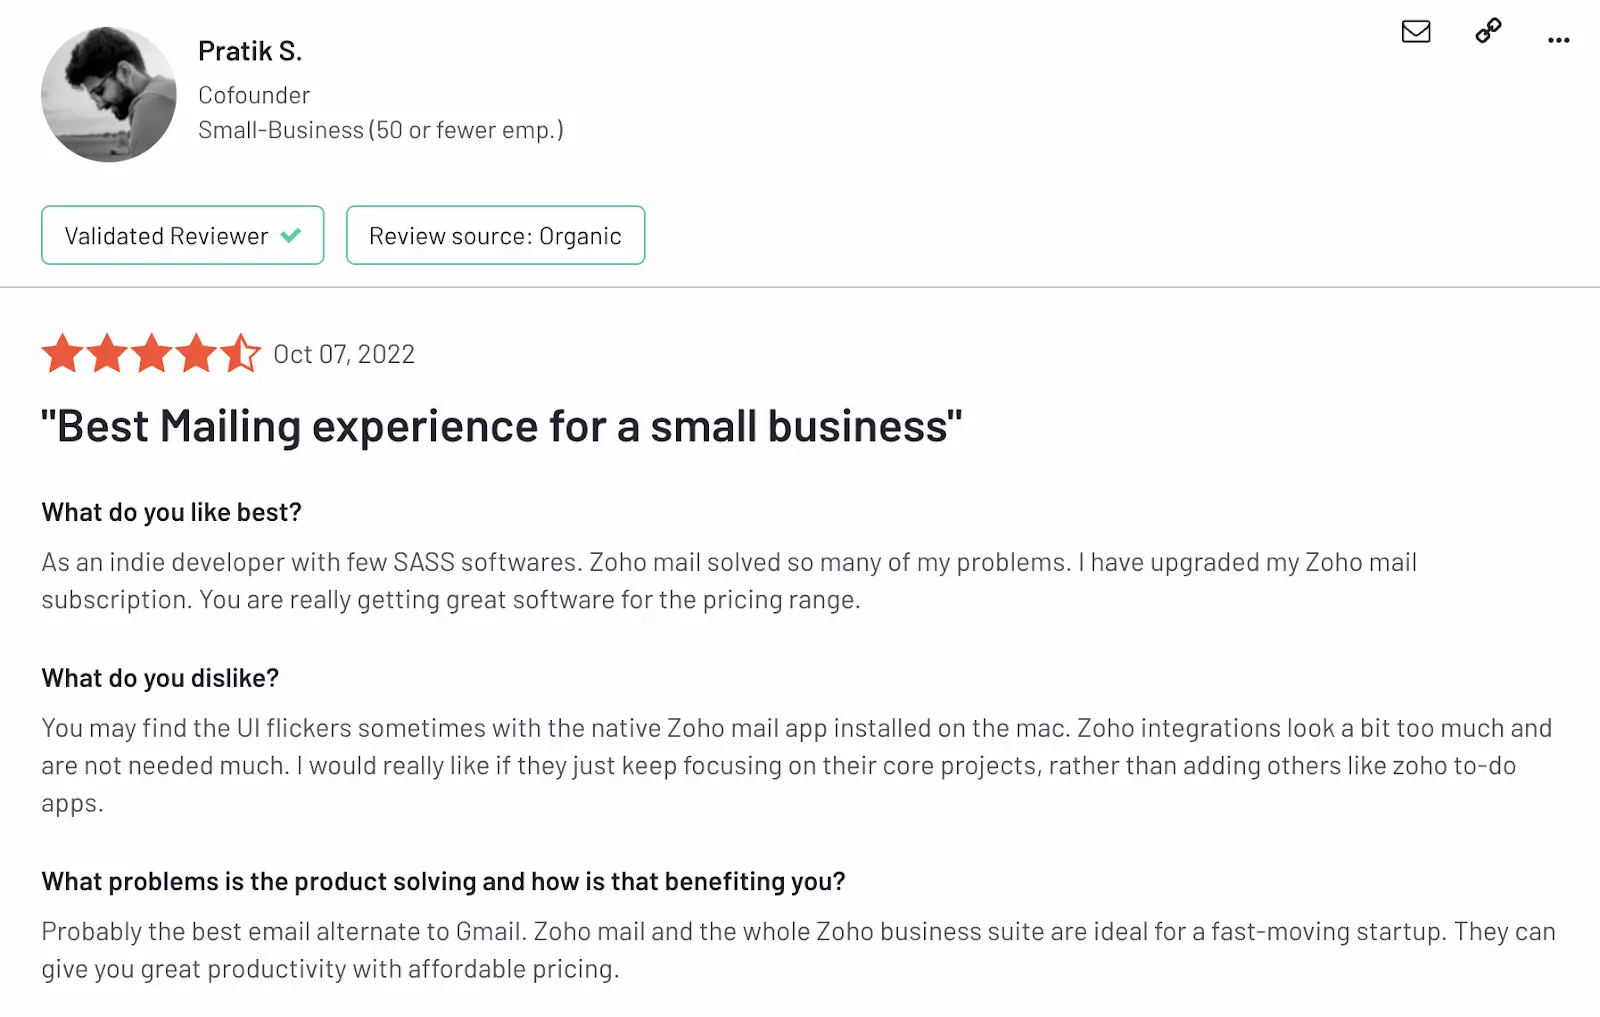 A screenshot of a review page for a small business.